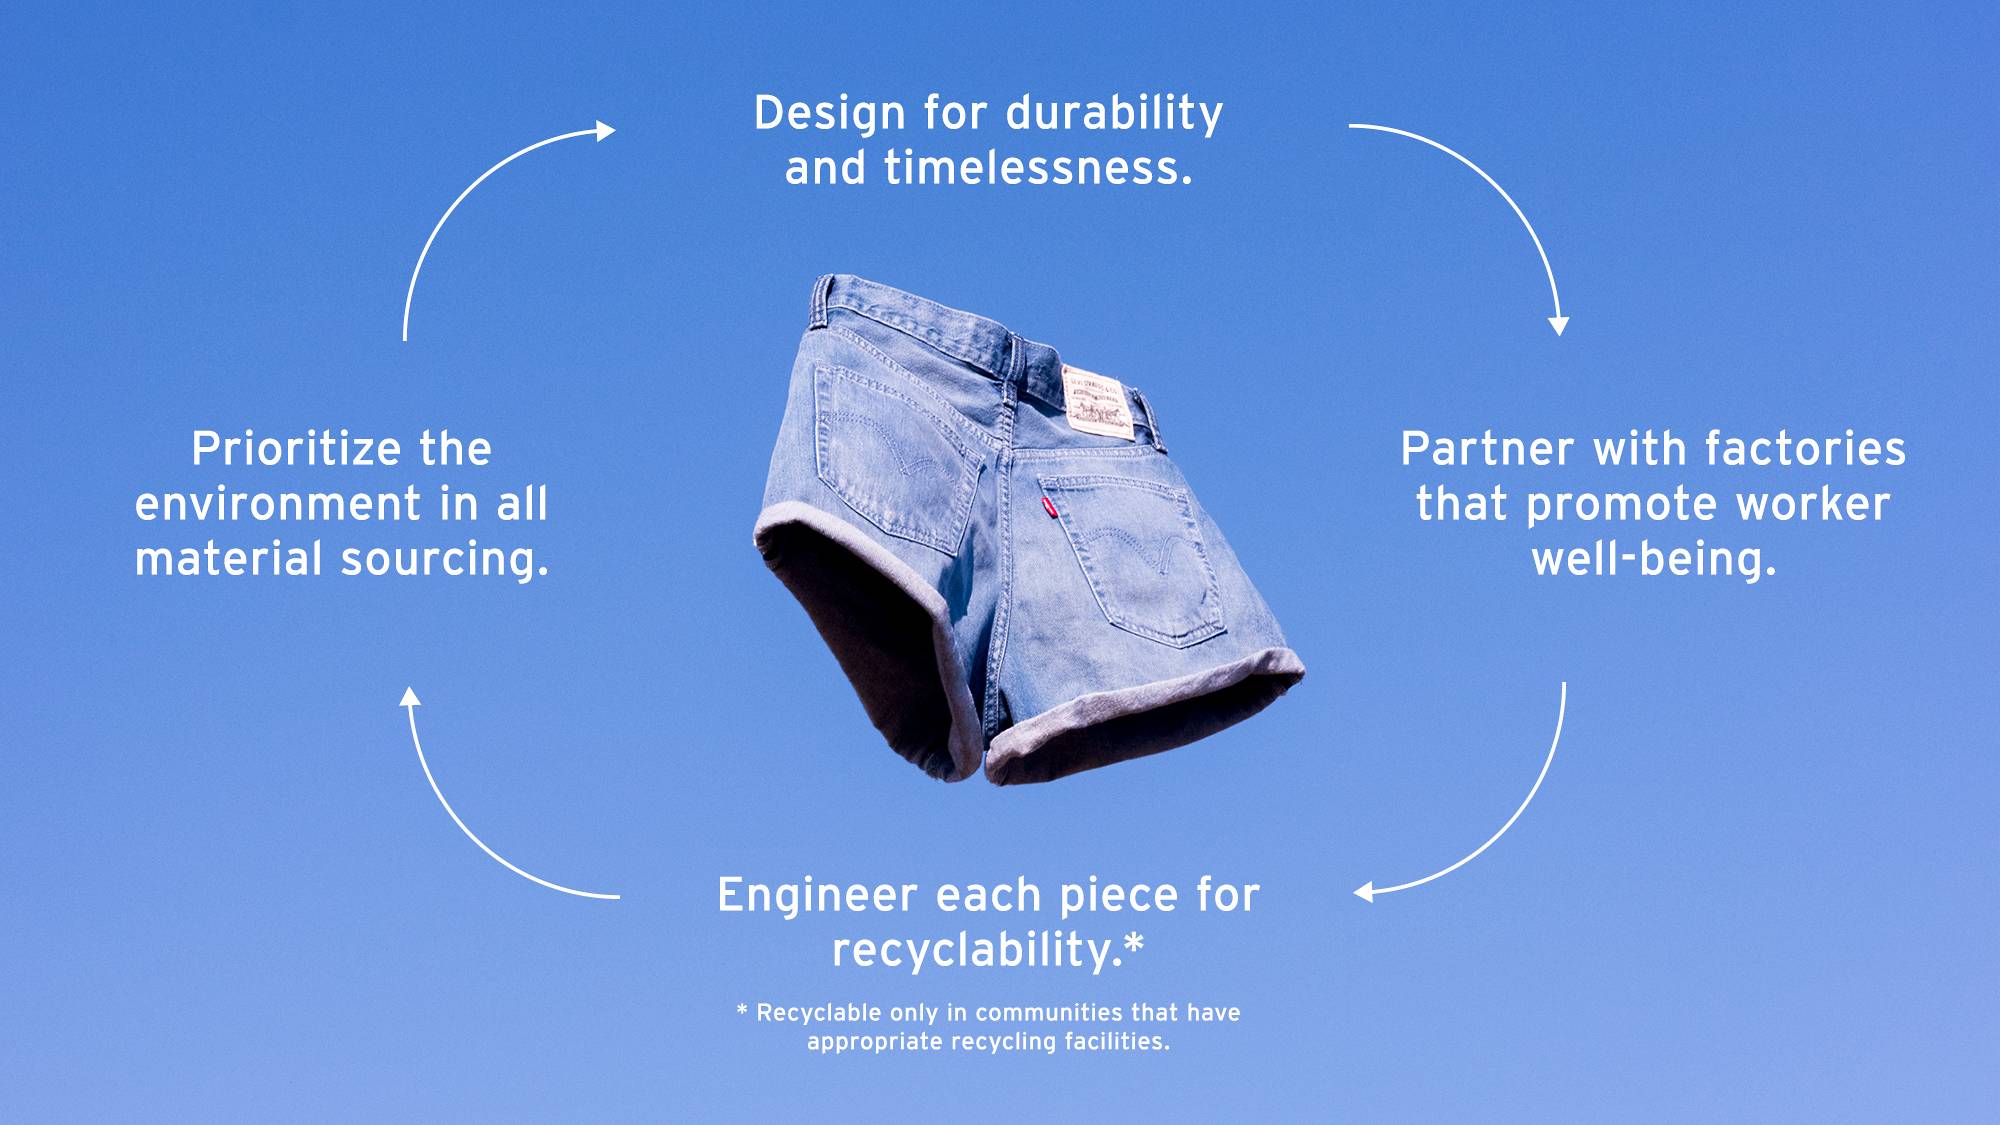 Prioritize the environment in all material sourcing. Partner with factories that promote worker well-being. Design for durability and timelessness. Engineer each piece for recyclability.*  * Recyclable only in communities that have appropriate recycling facilities.